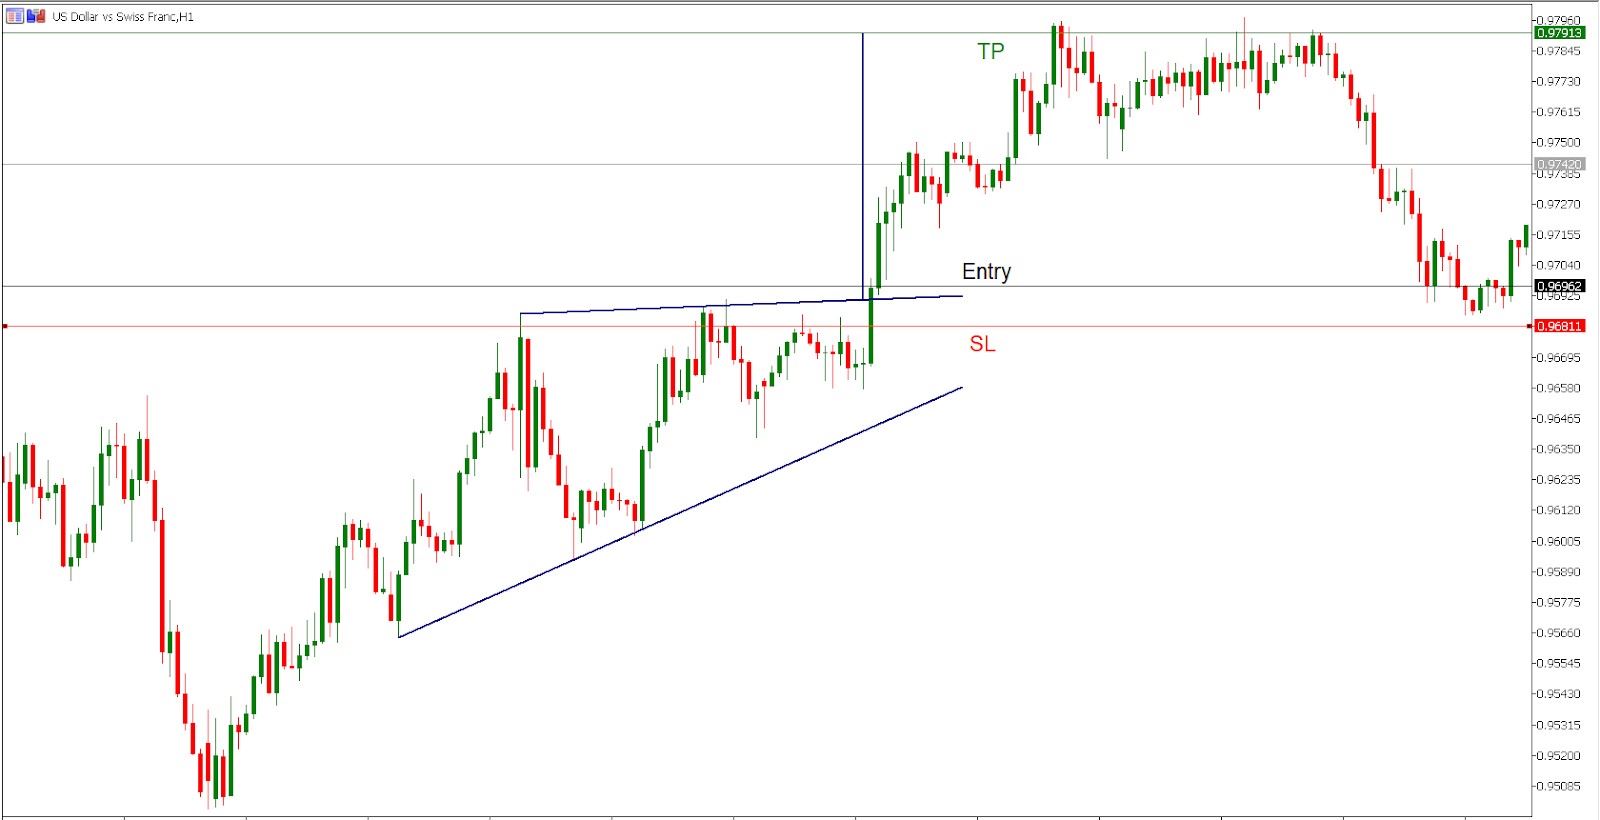 trading the ascending triangle on USD/CHF hourly chart